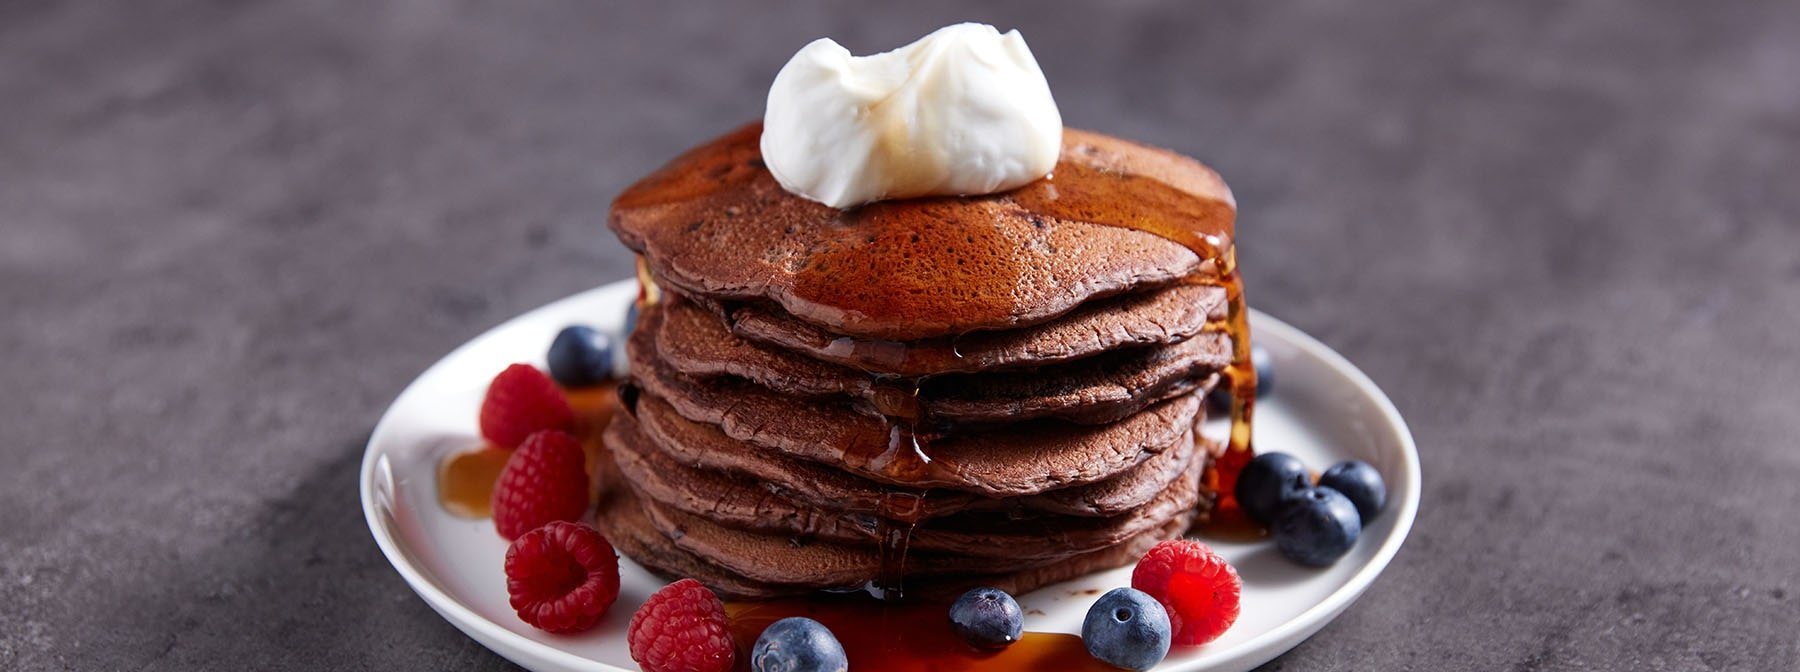 Steph Elswood’s Chocolate Chip & Cacao Pancakes